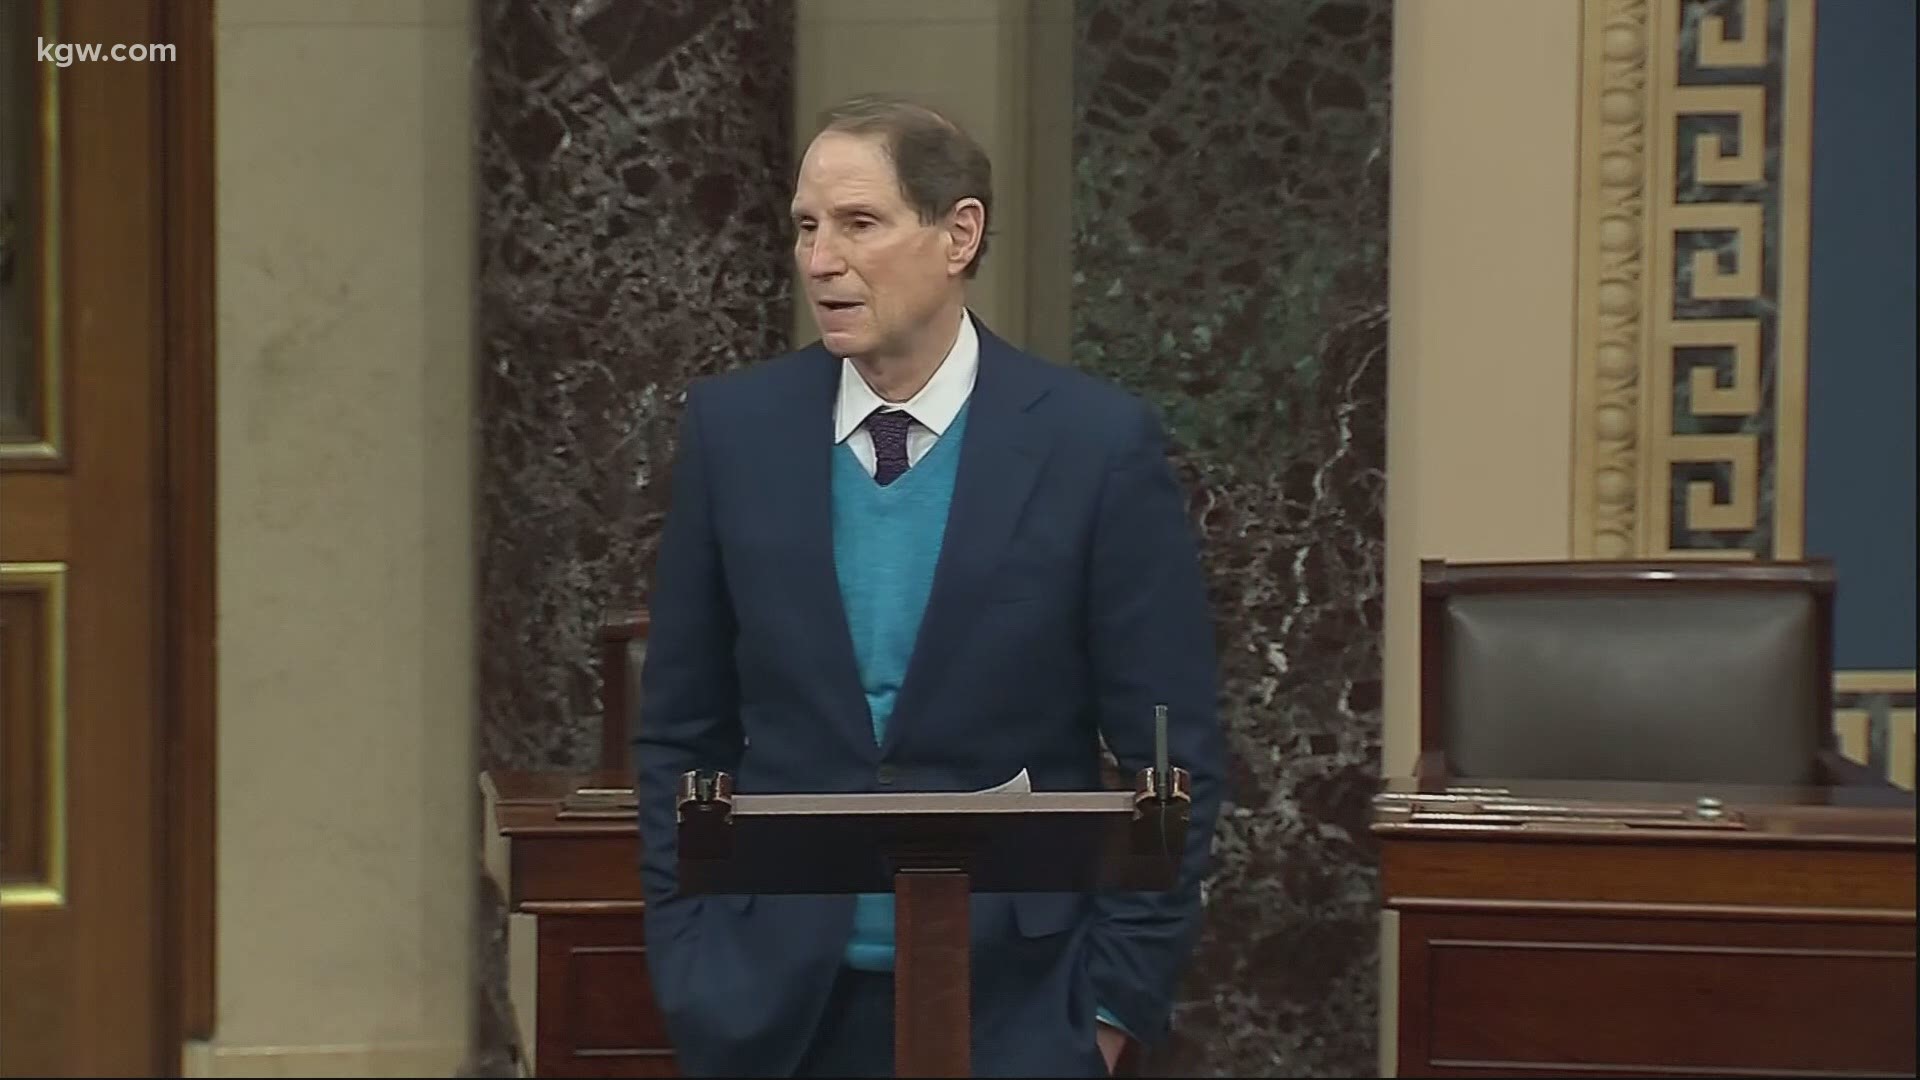 Oregon Senator Wyden blasts colleagues for still objecting to election results